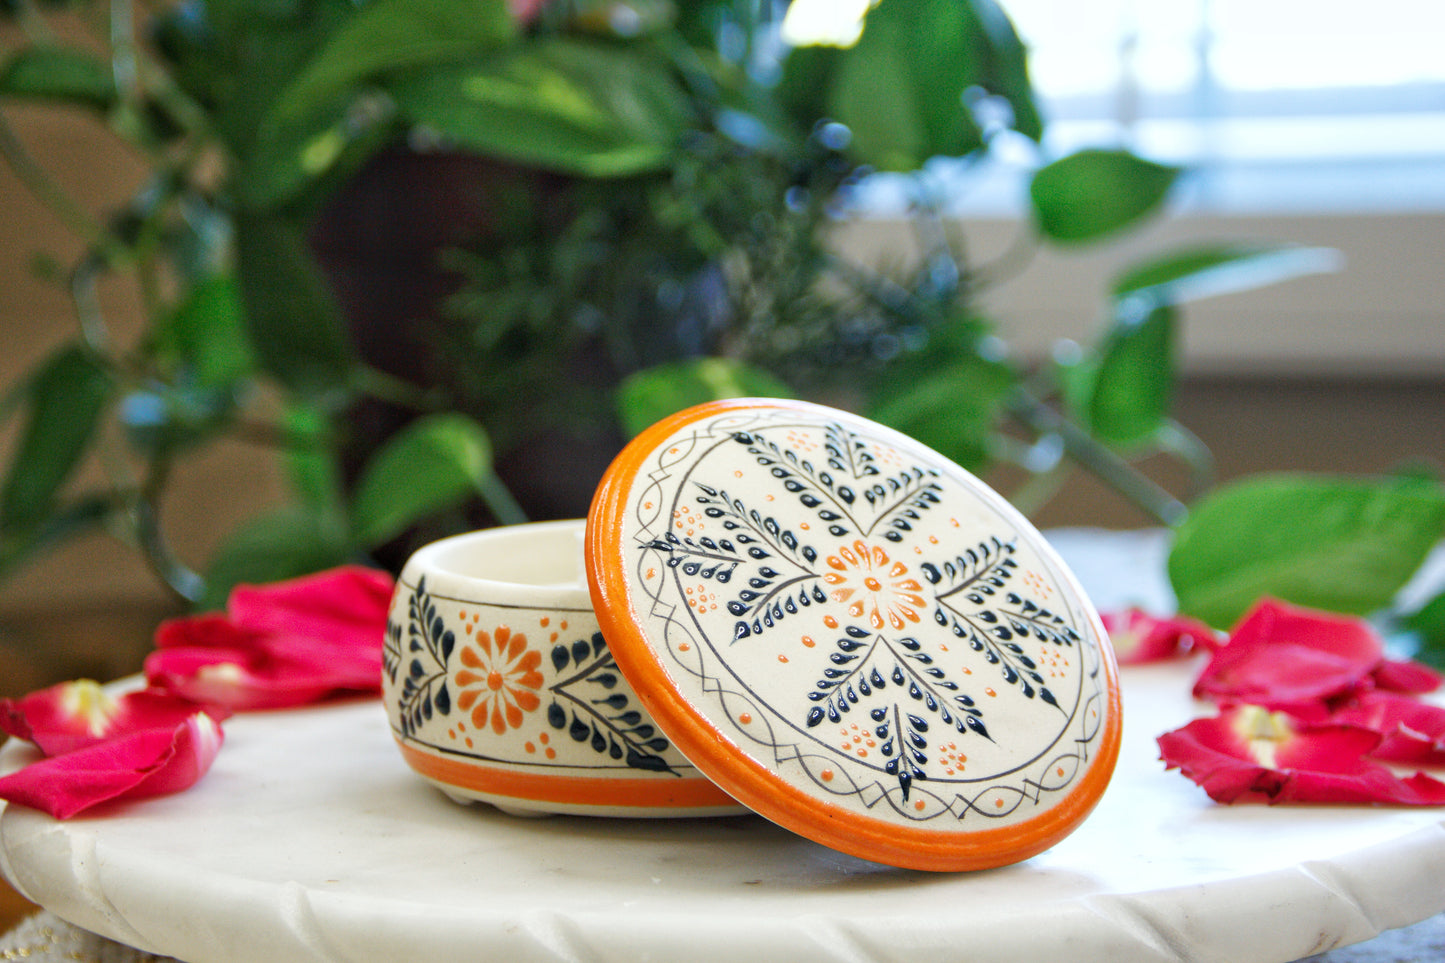 handmade artisanal candle in an orange floral design talavera with an open lid. Custom made by Artisan in Mexico. 100% All Natural Soy Candle. Reuse the talavera as home decor or storage